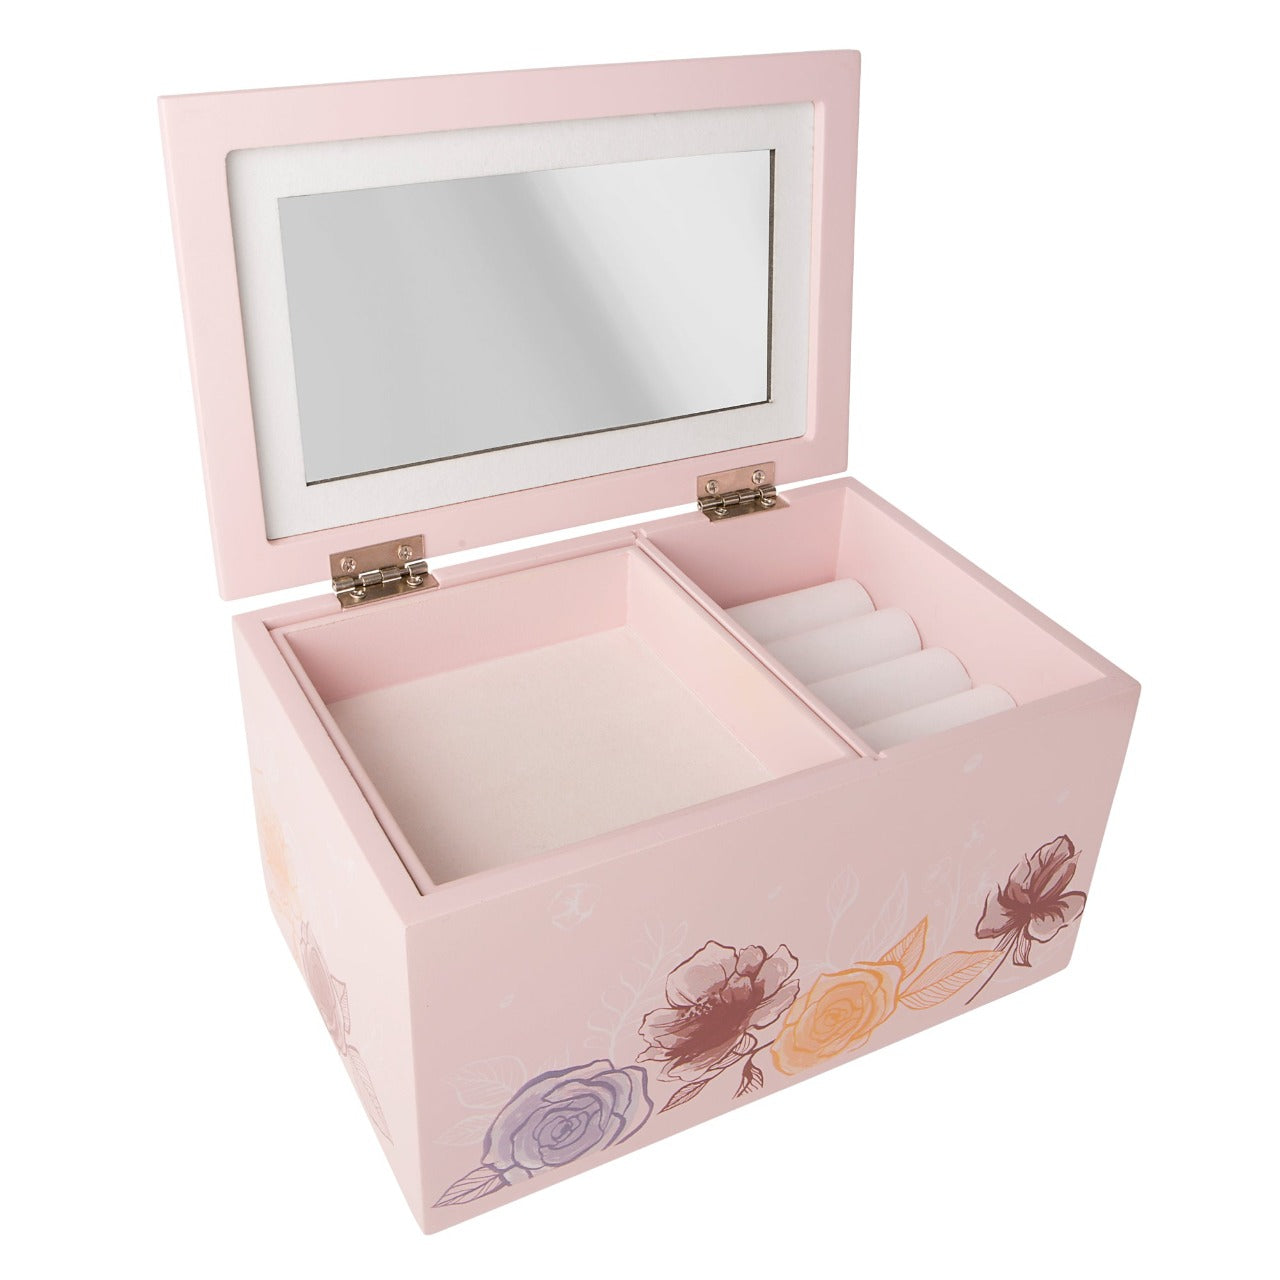 Disney Princess Wooden Jewellery Box With Hinged Lid  Official Disney Princess Jewellery box is the perfect gift for any Disney fan! This Pink  jewellery box is made with solid wood which features a hinged lid.  The Disney Collection features favourite characters from cult classics. There is something for every Disney fan no matter their age. Disney Princess and Beauty And The Beast collections are also available.